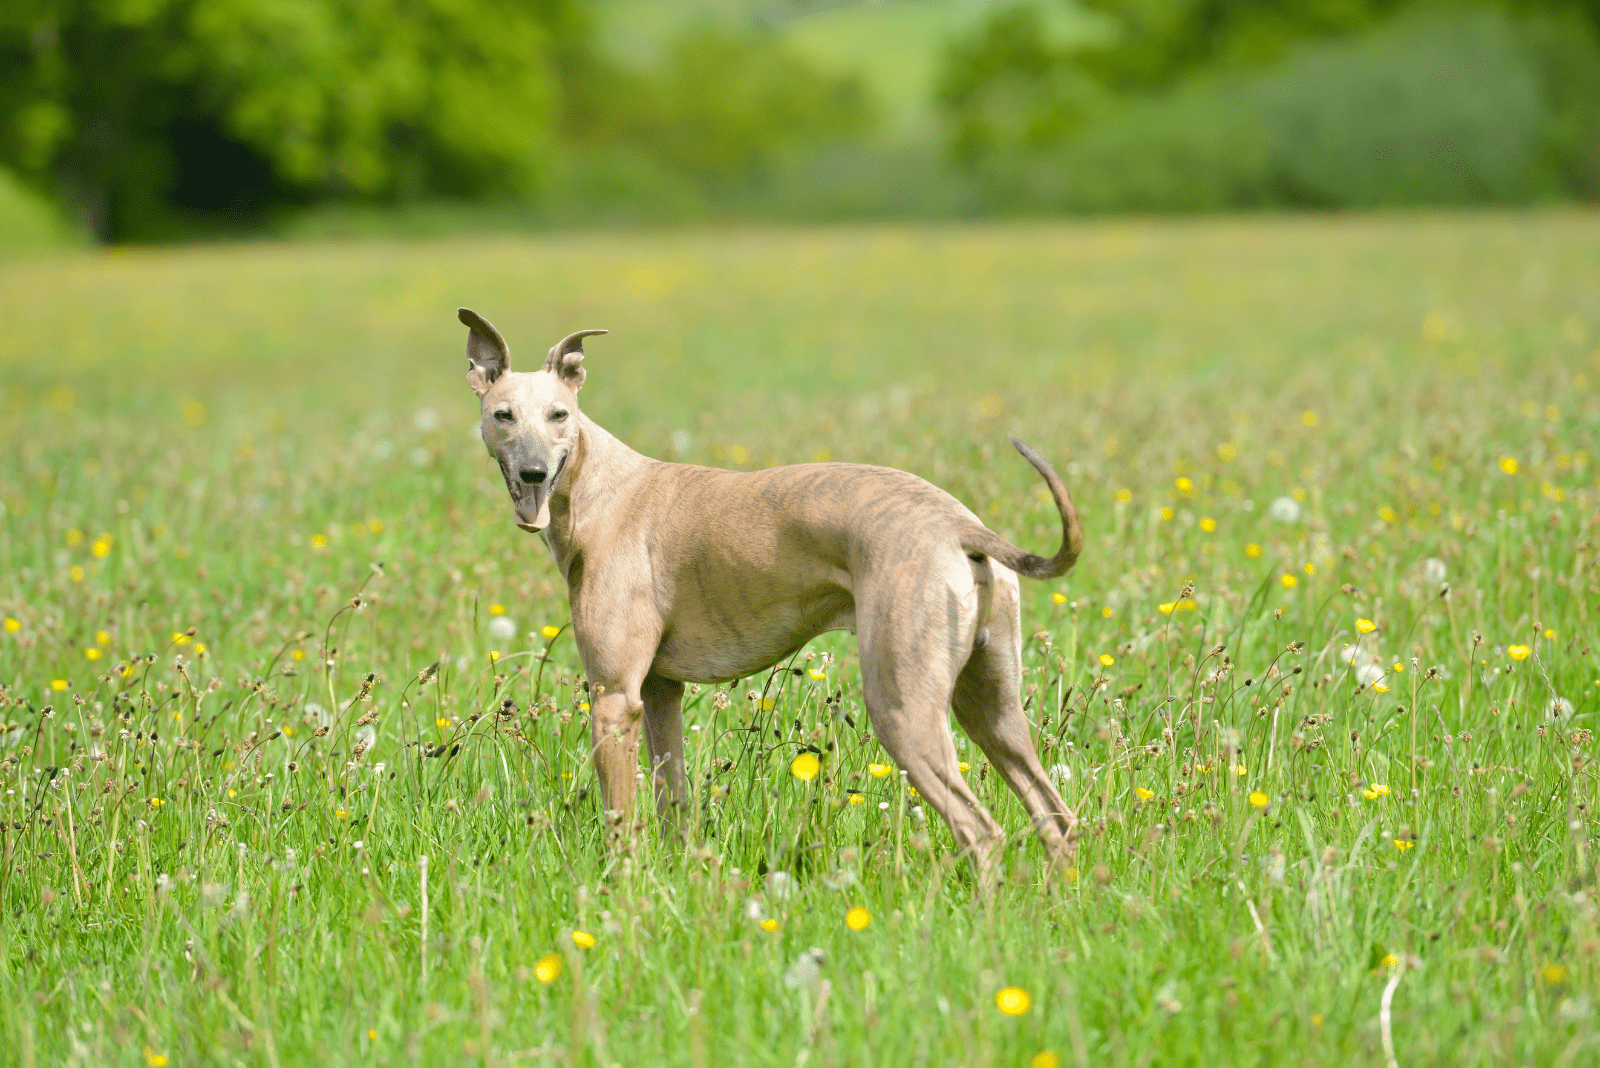 A greyhound stands in a field